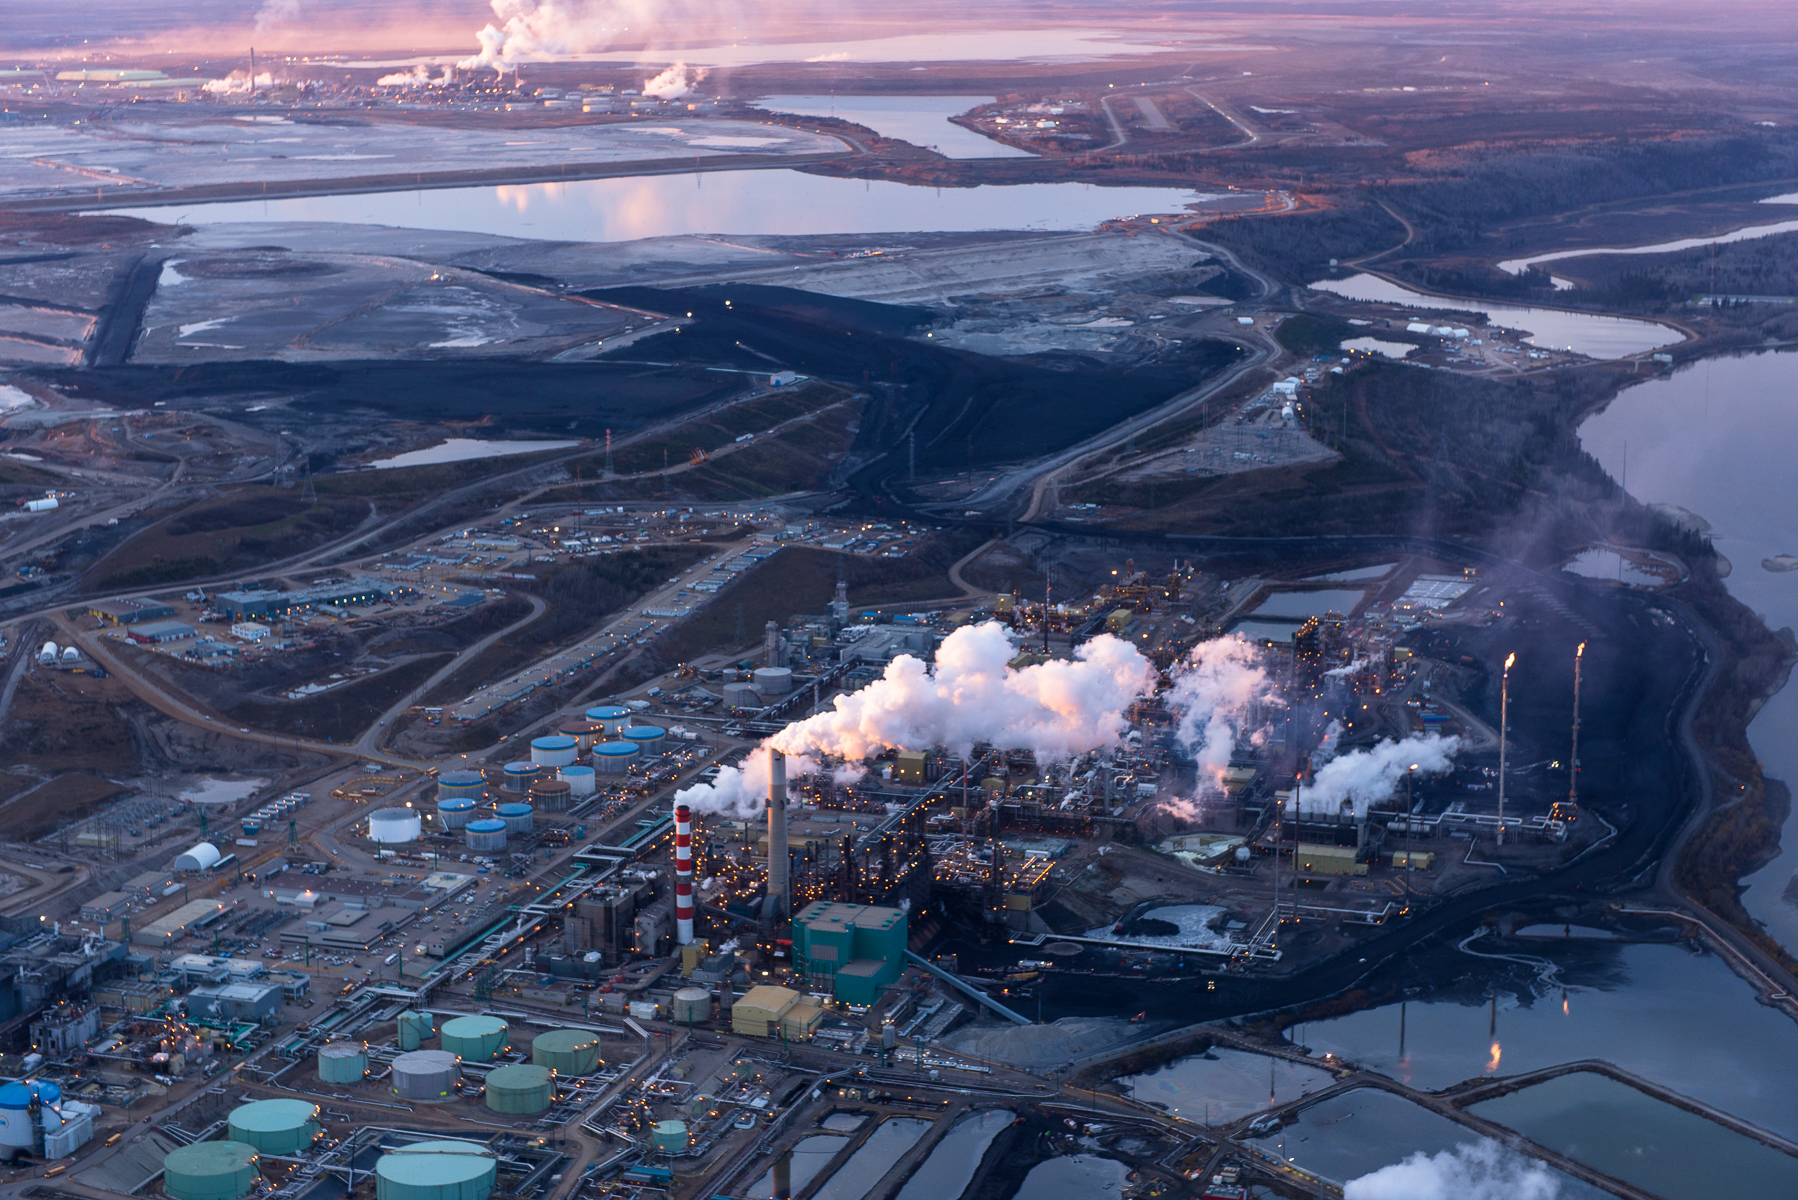 Suncor amd Syncrude Upgraders, mines, tailings ponds, and Athabasca River. Alberta Oil/Tar Sands, Northern Alberta, Canada.Fine Art Print Price ListOpen and Larger Edition Prints. These are produced to the same high standards as our limited edition prints and offer collectors a more affordable way to get to know our work.Prints  are limited to an edition of 50 in each size above 20” X 24”. Prices are for prints only and do not include tax or shipping.All prices are in US dollars.12”x18” 					$350.16”x24” 				       $650.20”x30” 					$1000.24”x36” 				       $1500. 30”x45” 					$2300.40”x60”				      $3600